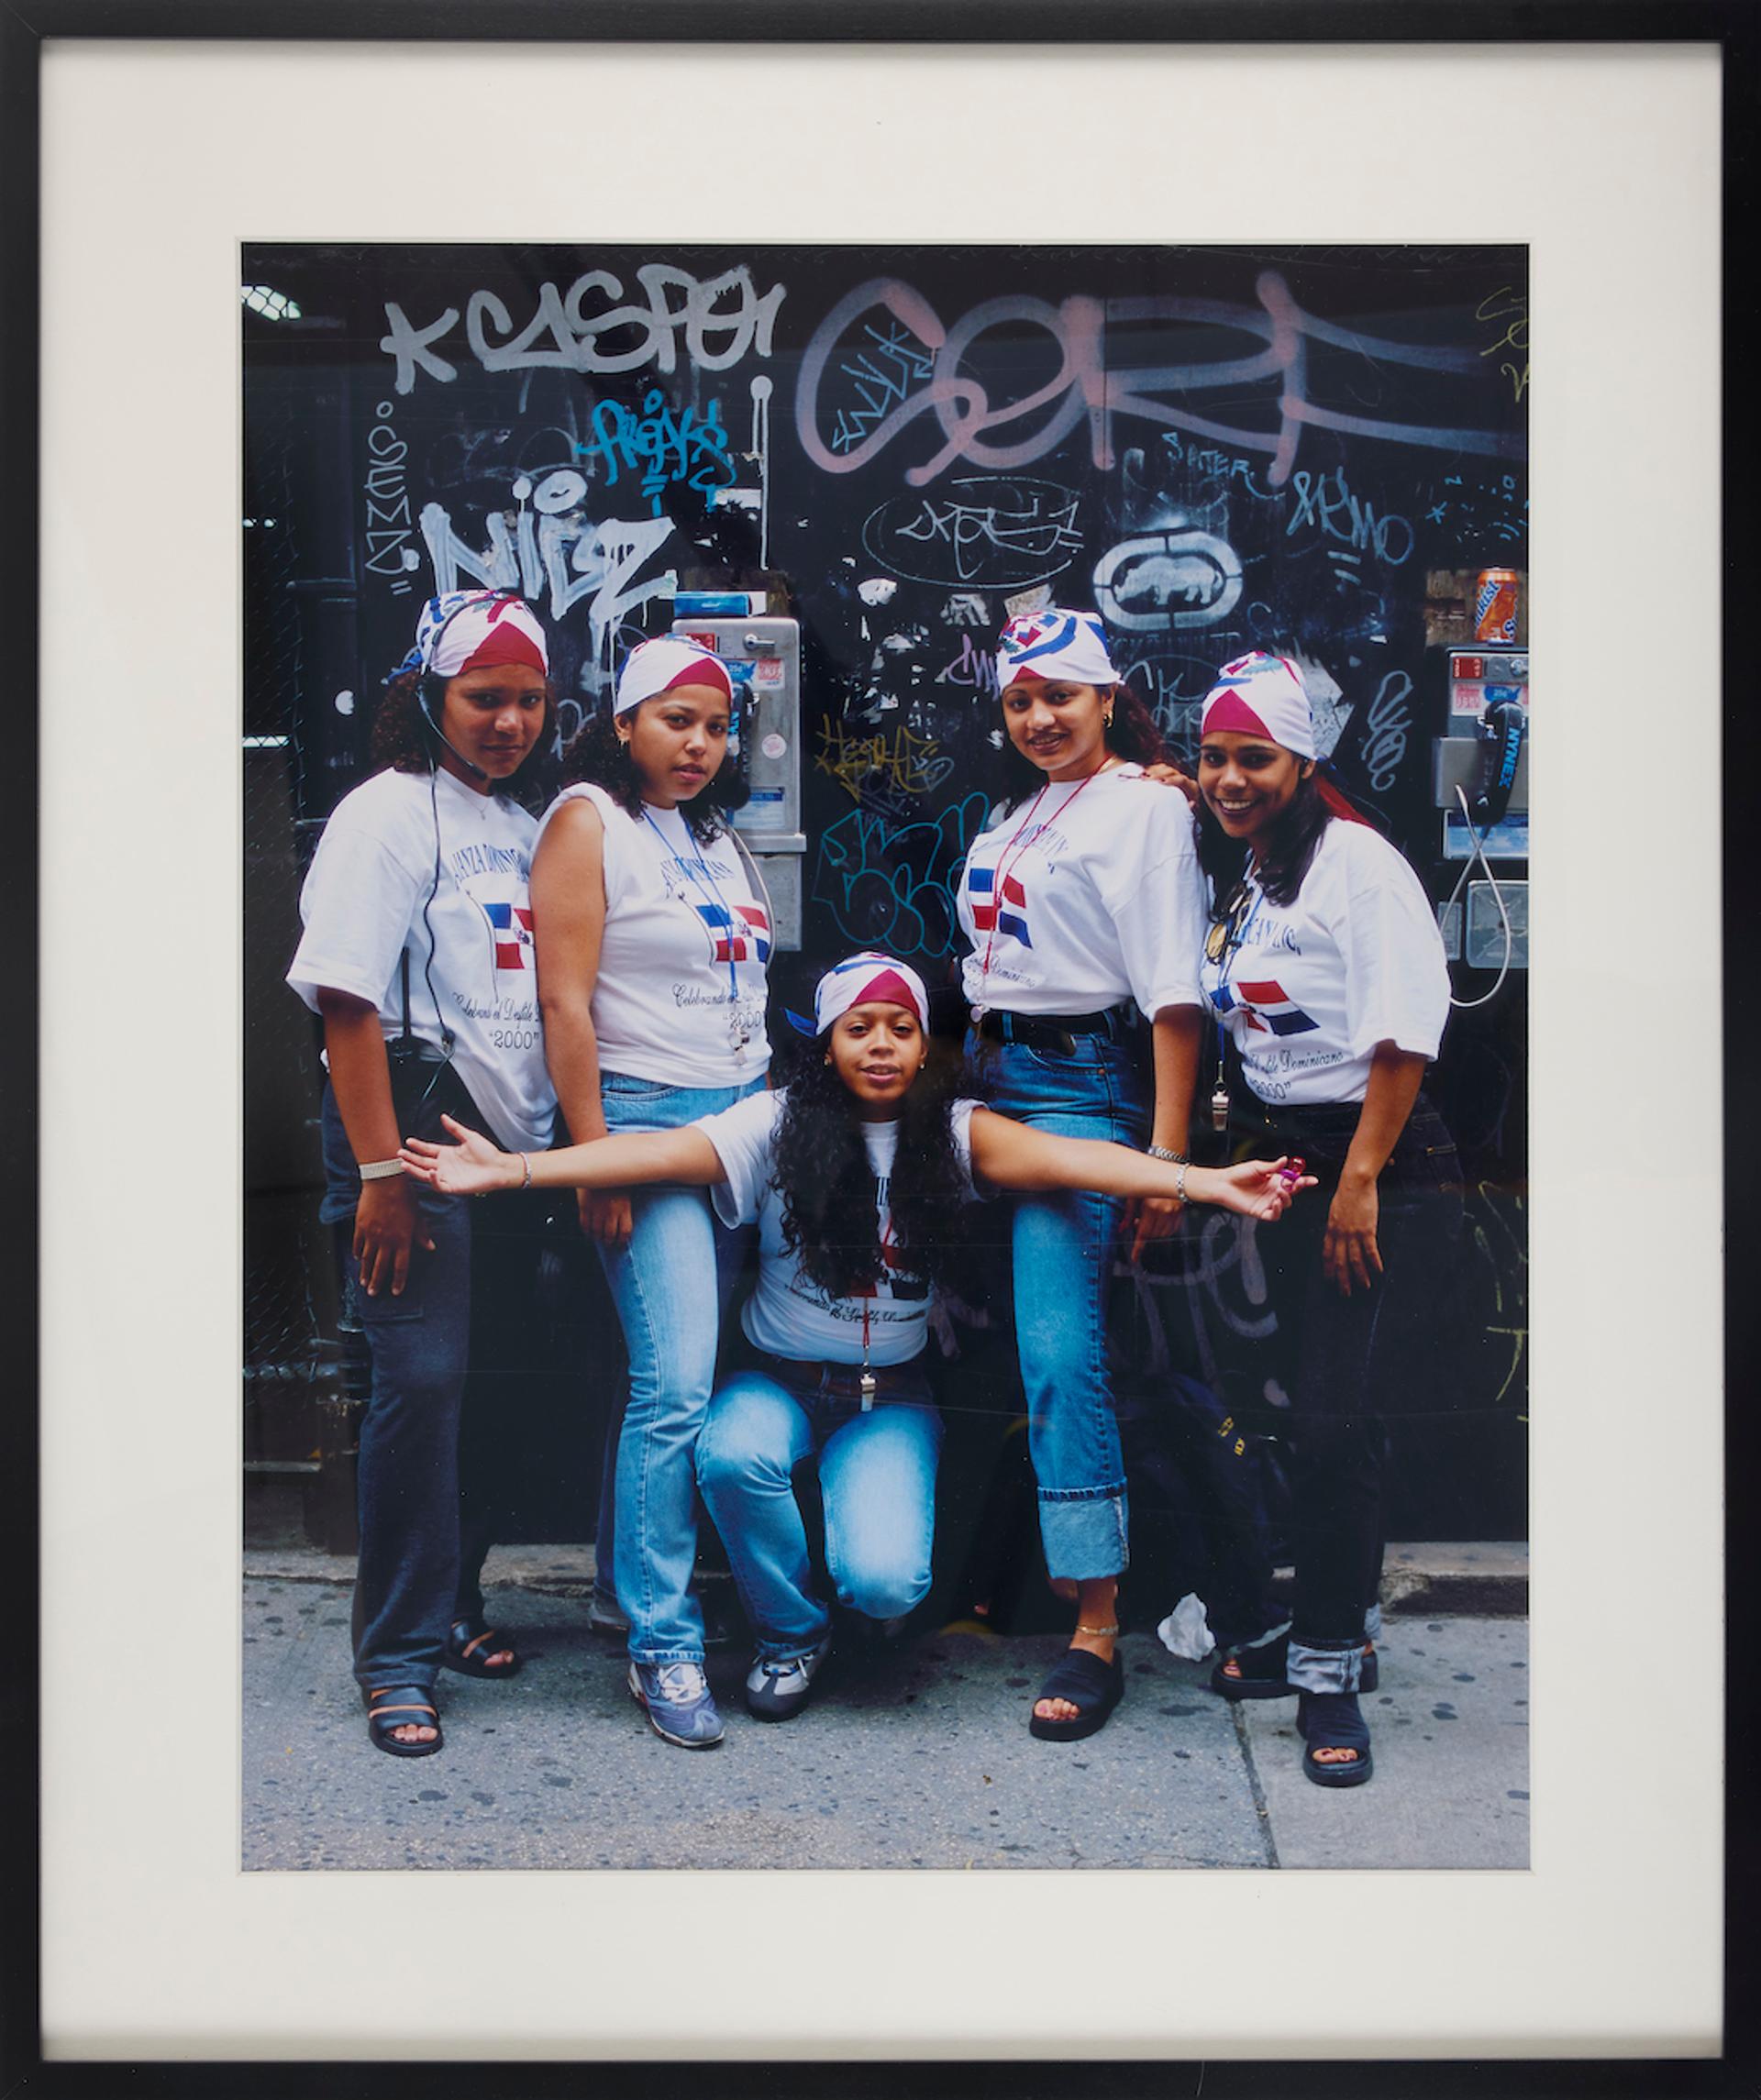 Jamel Shabazz, Oneness, New York City, 2001. Courtesy of the Bronx Museum of the Arts